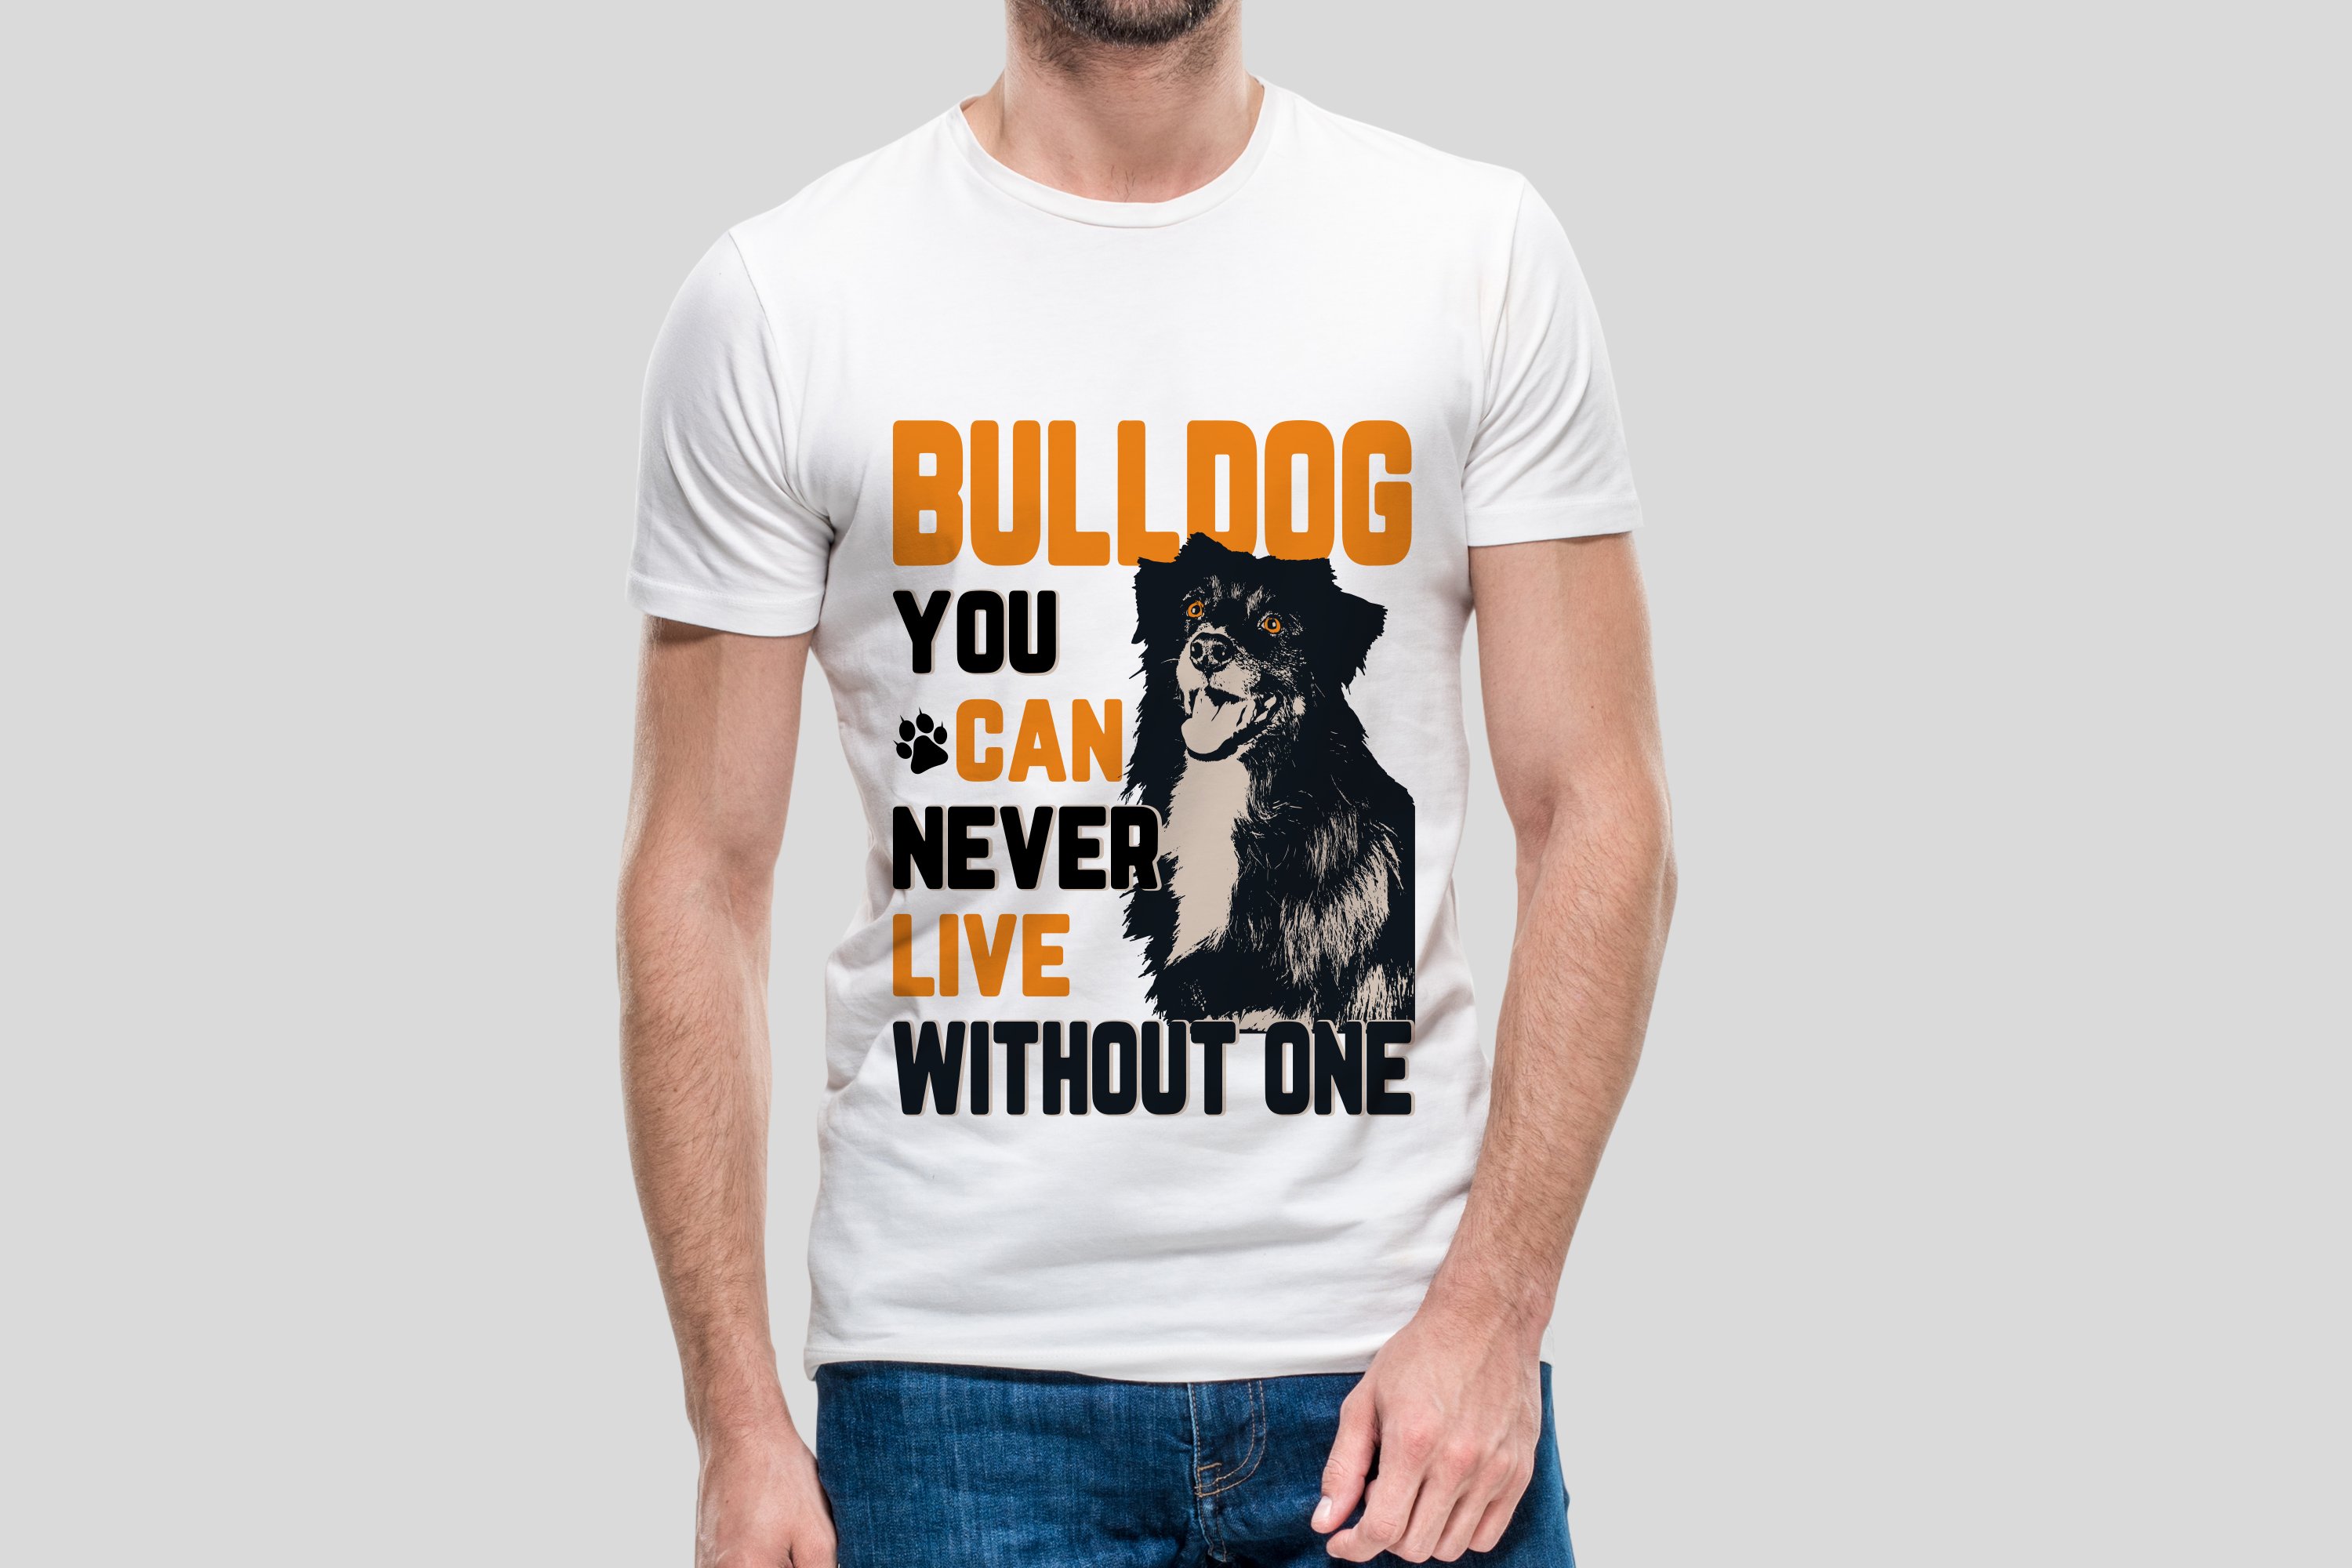 Classic white t-shirt with a bicolor lettering and dog illustration.